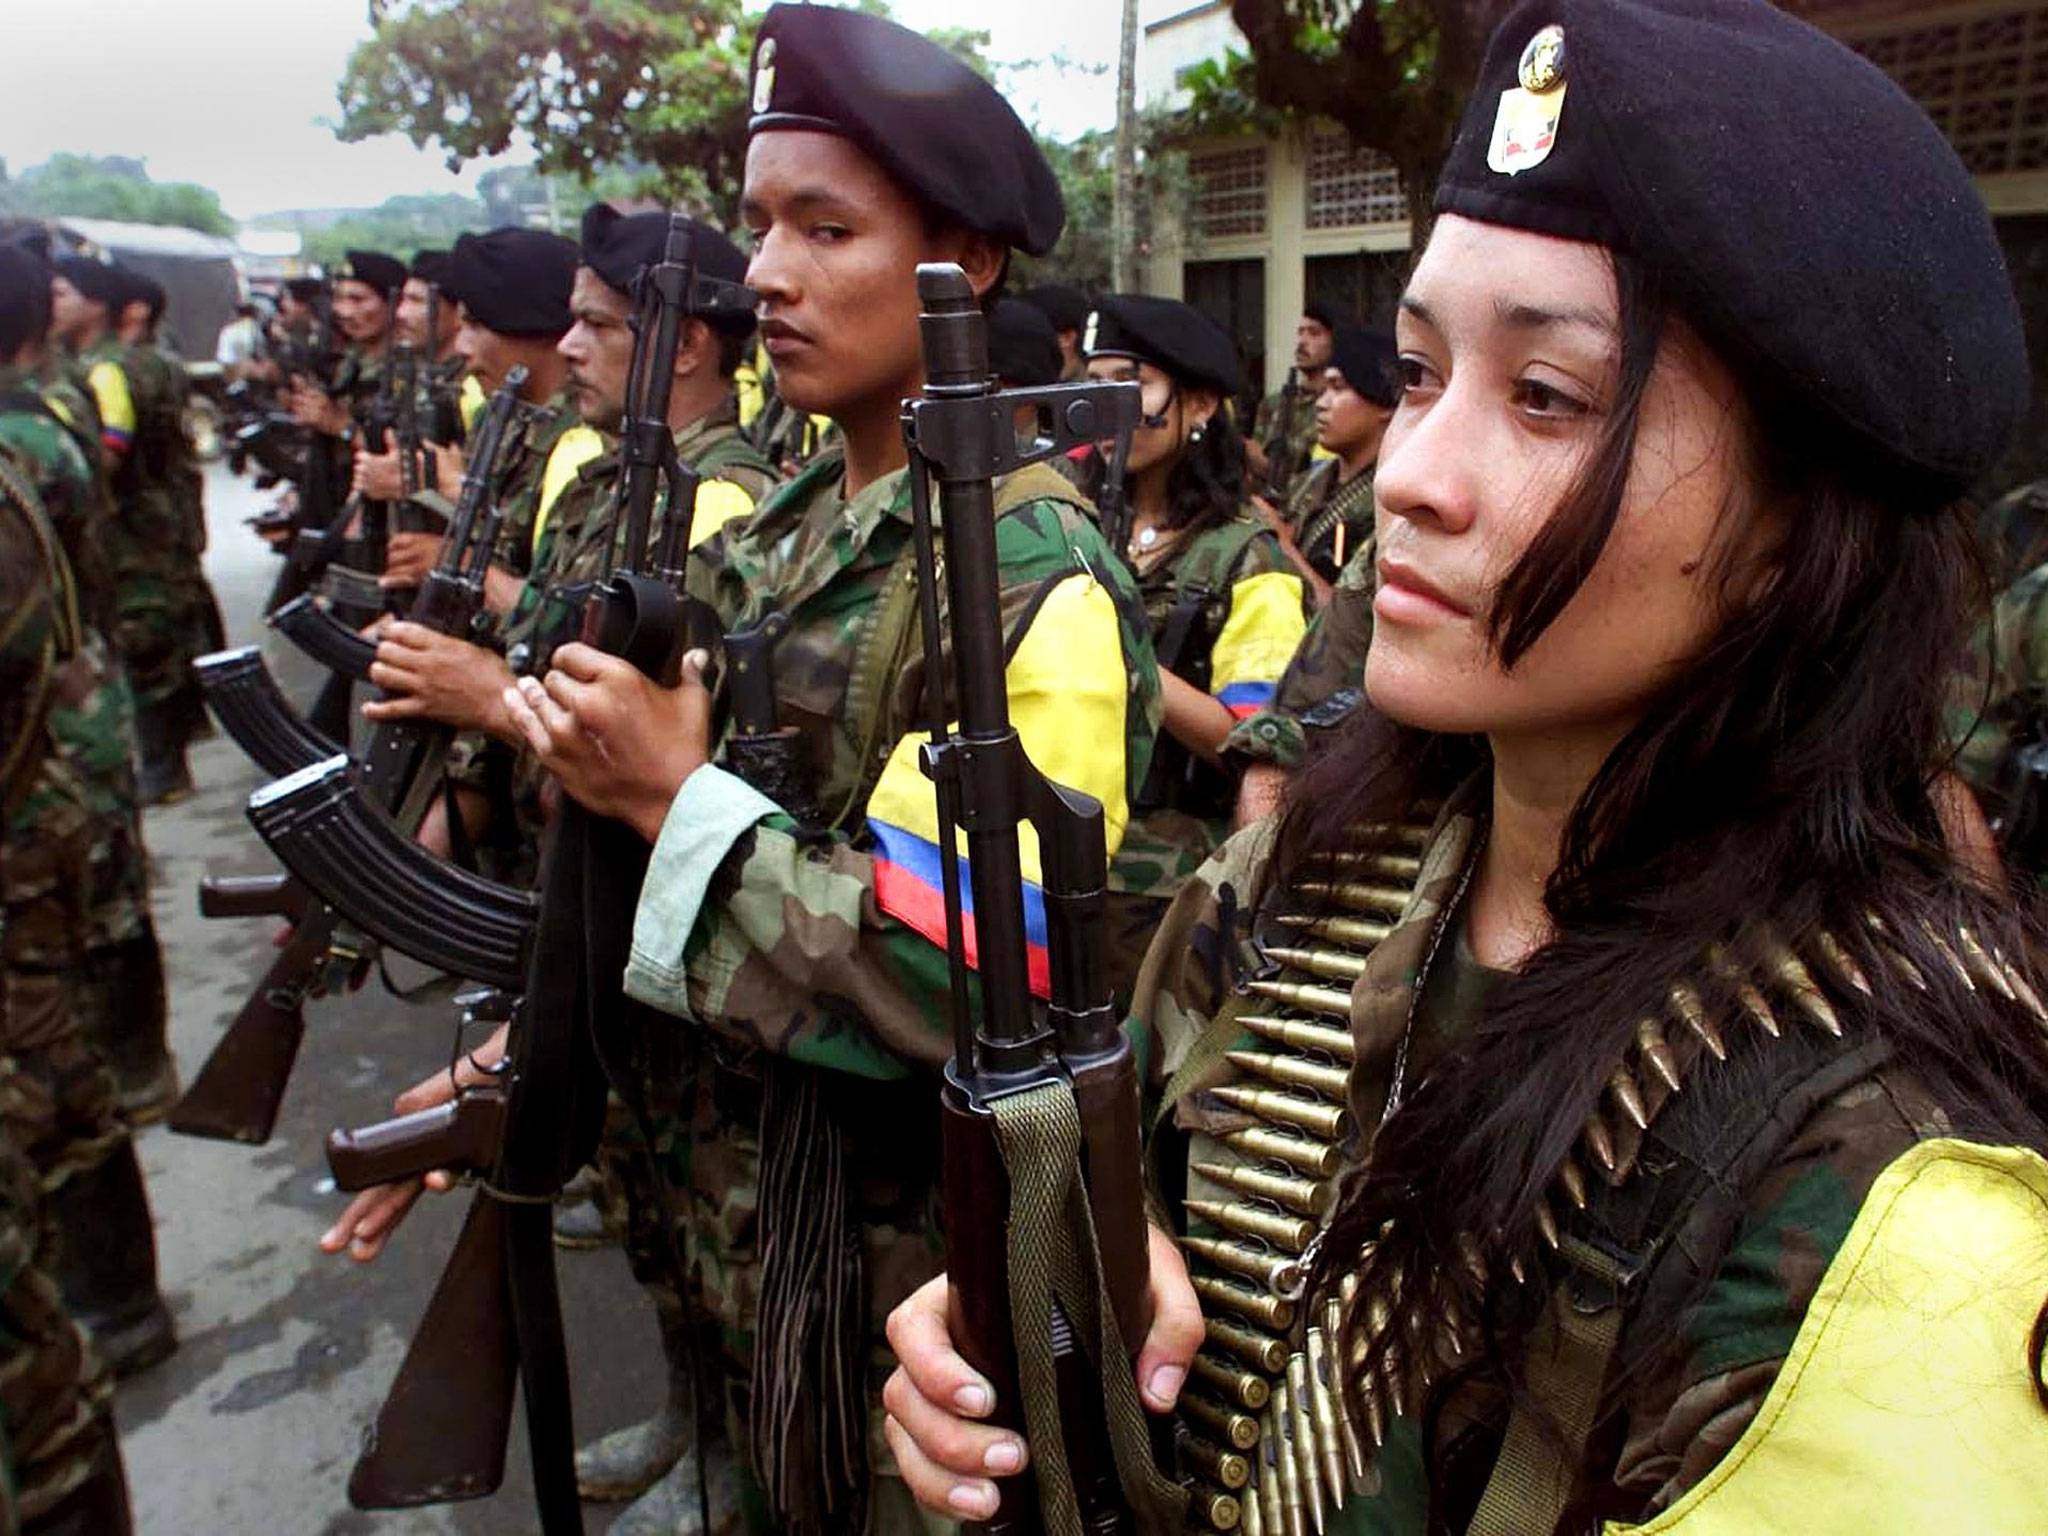 Farc rebels. The peace agreement seeks to end the longest running conflict in the Americas (photo credit: The Independent)